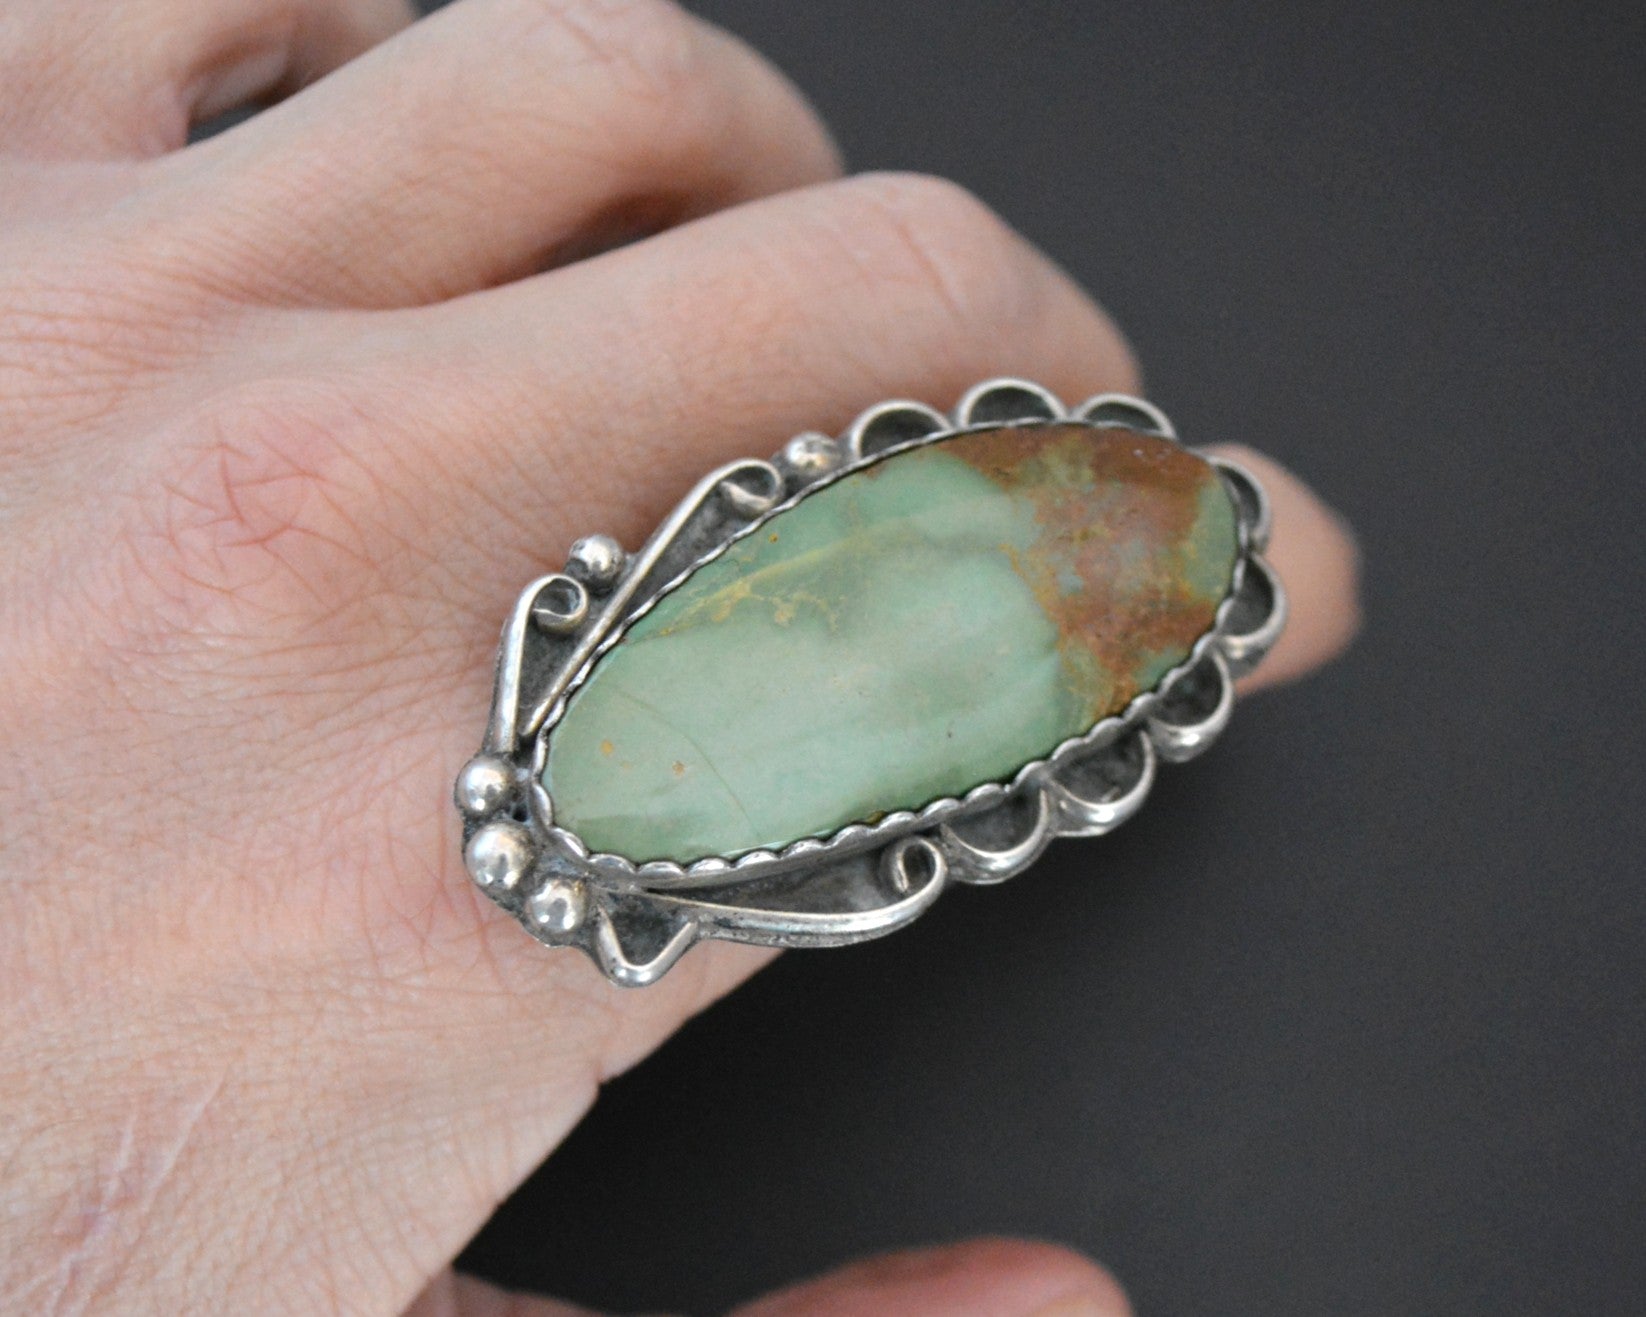 Huge Navajo Turquoise Ring - Size 7.5